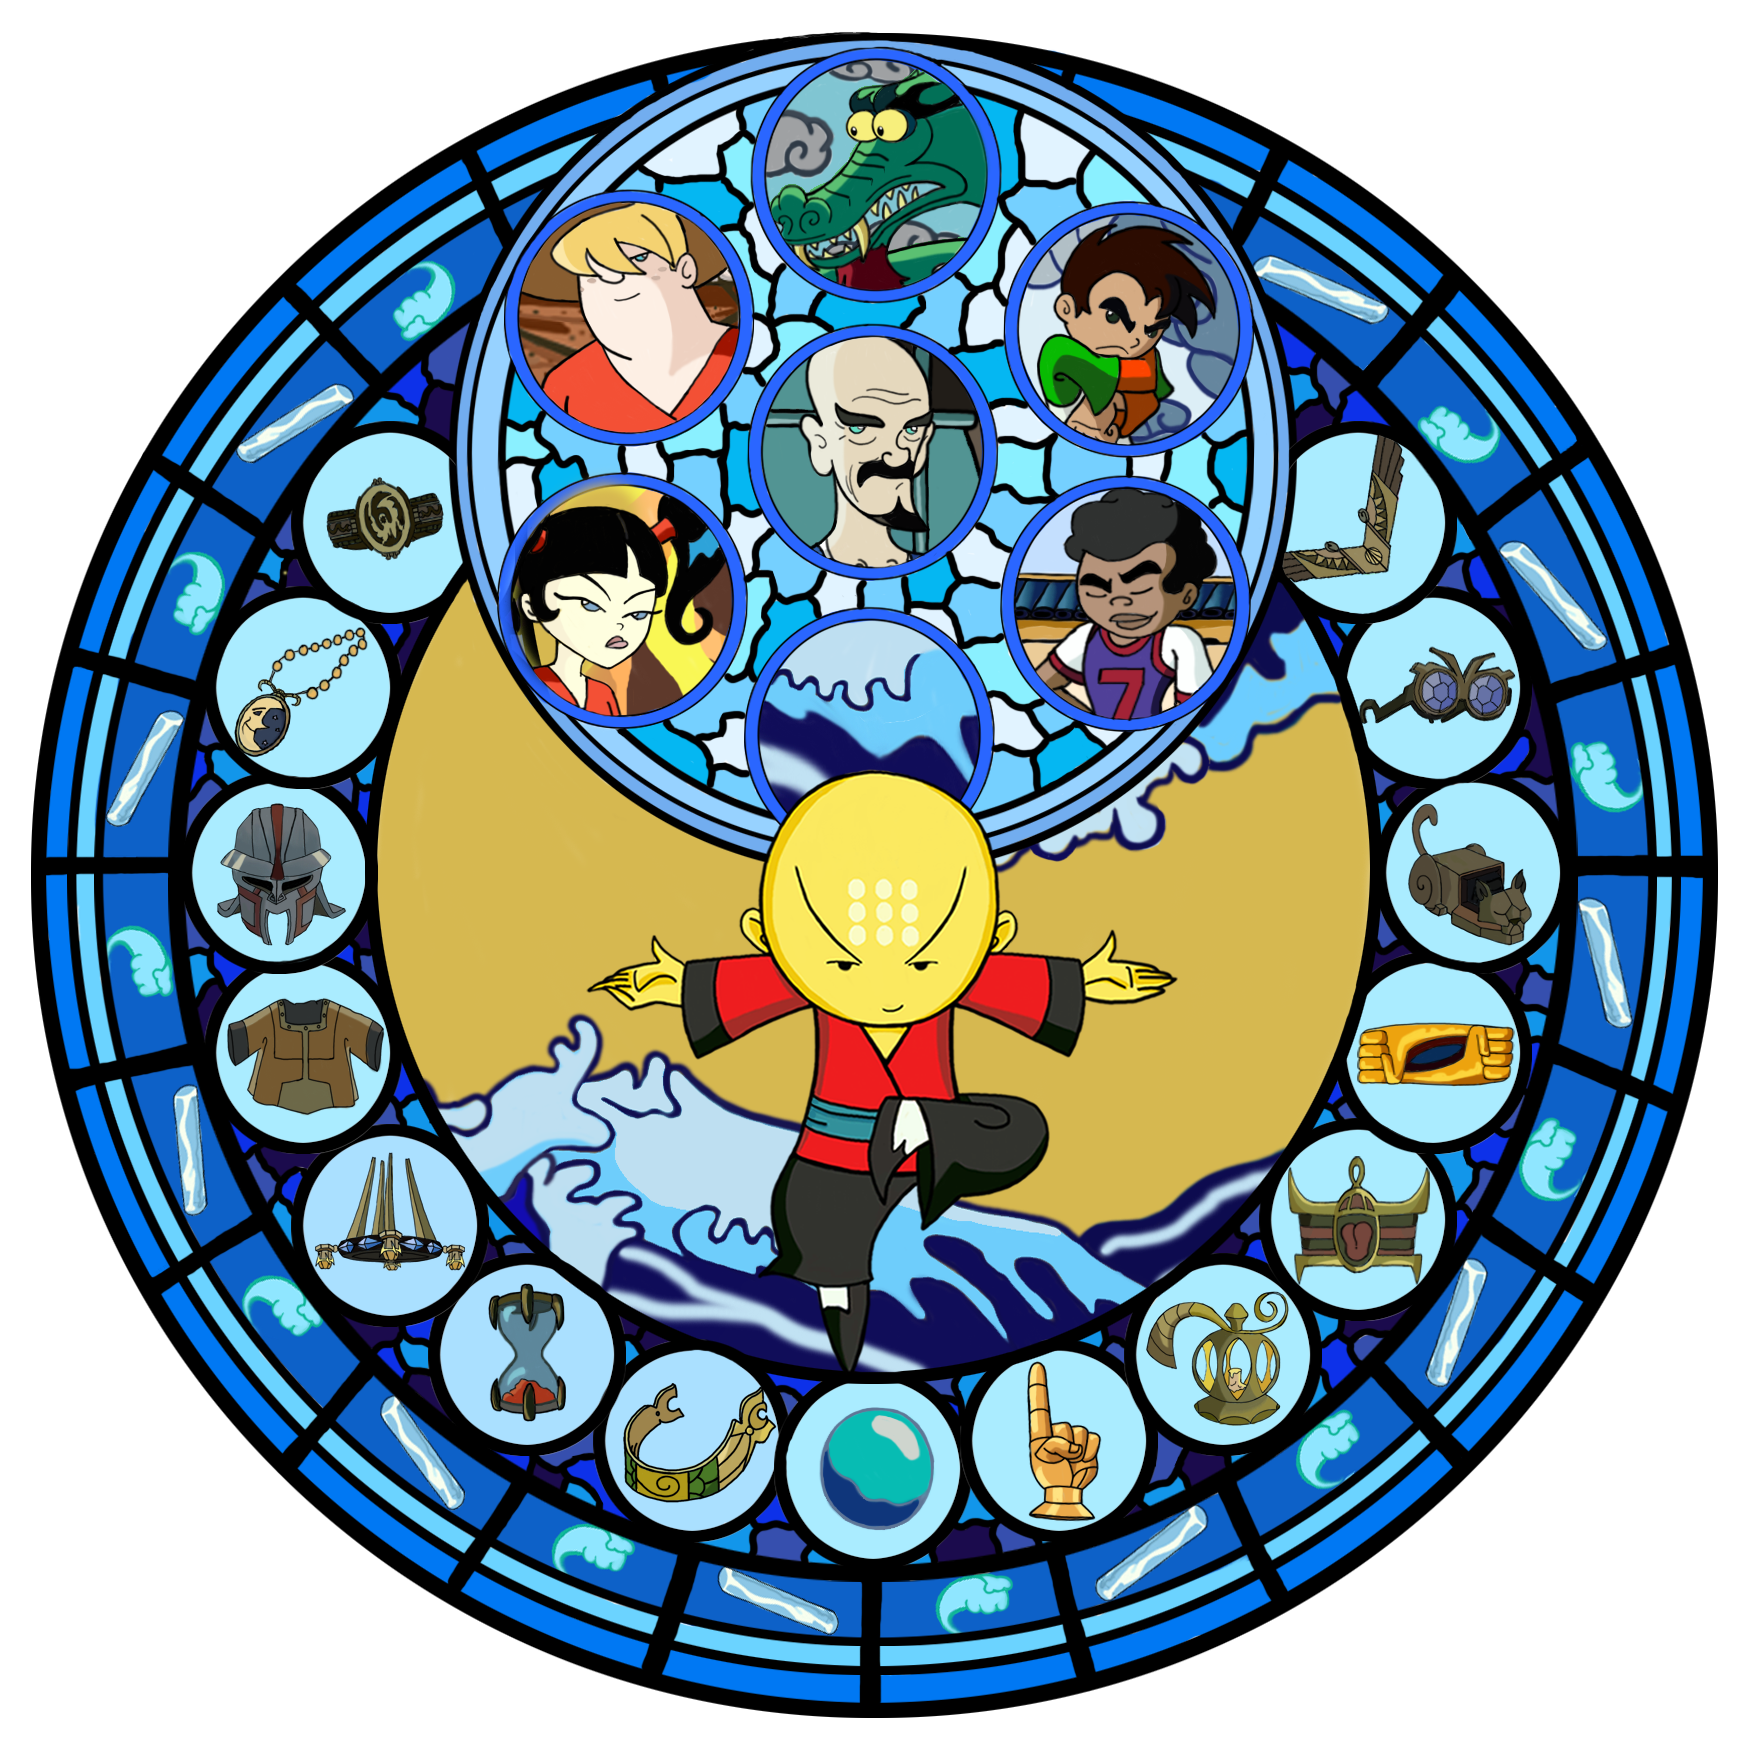 Xiaolin Showdown Stained Glass Omi By Purpleorchid On